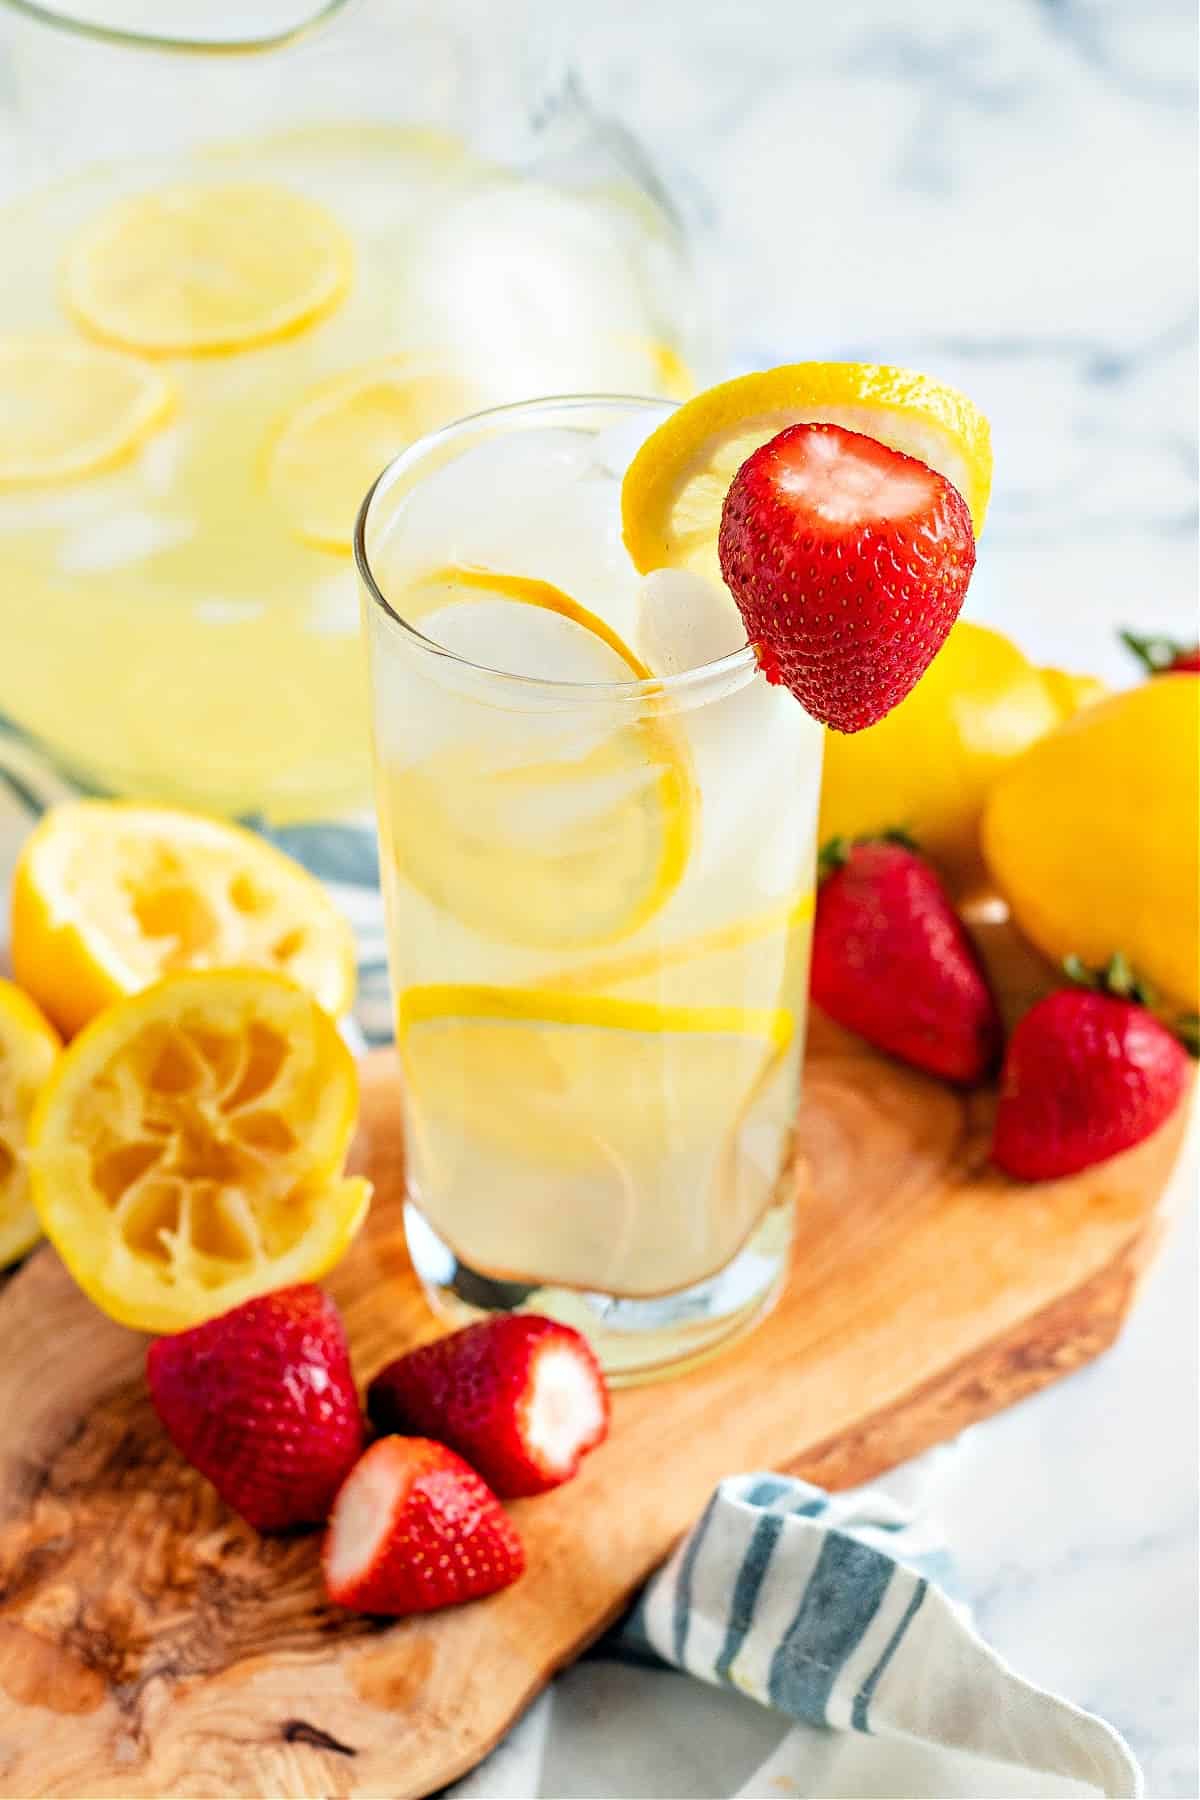 a close-up of glass of keto lemonade on a wooden board with lemon slices and fresh strawberries